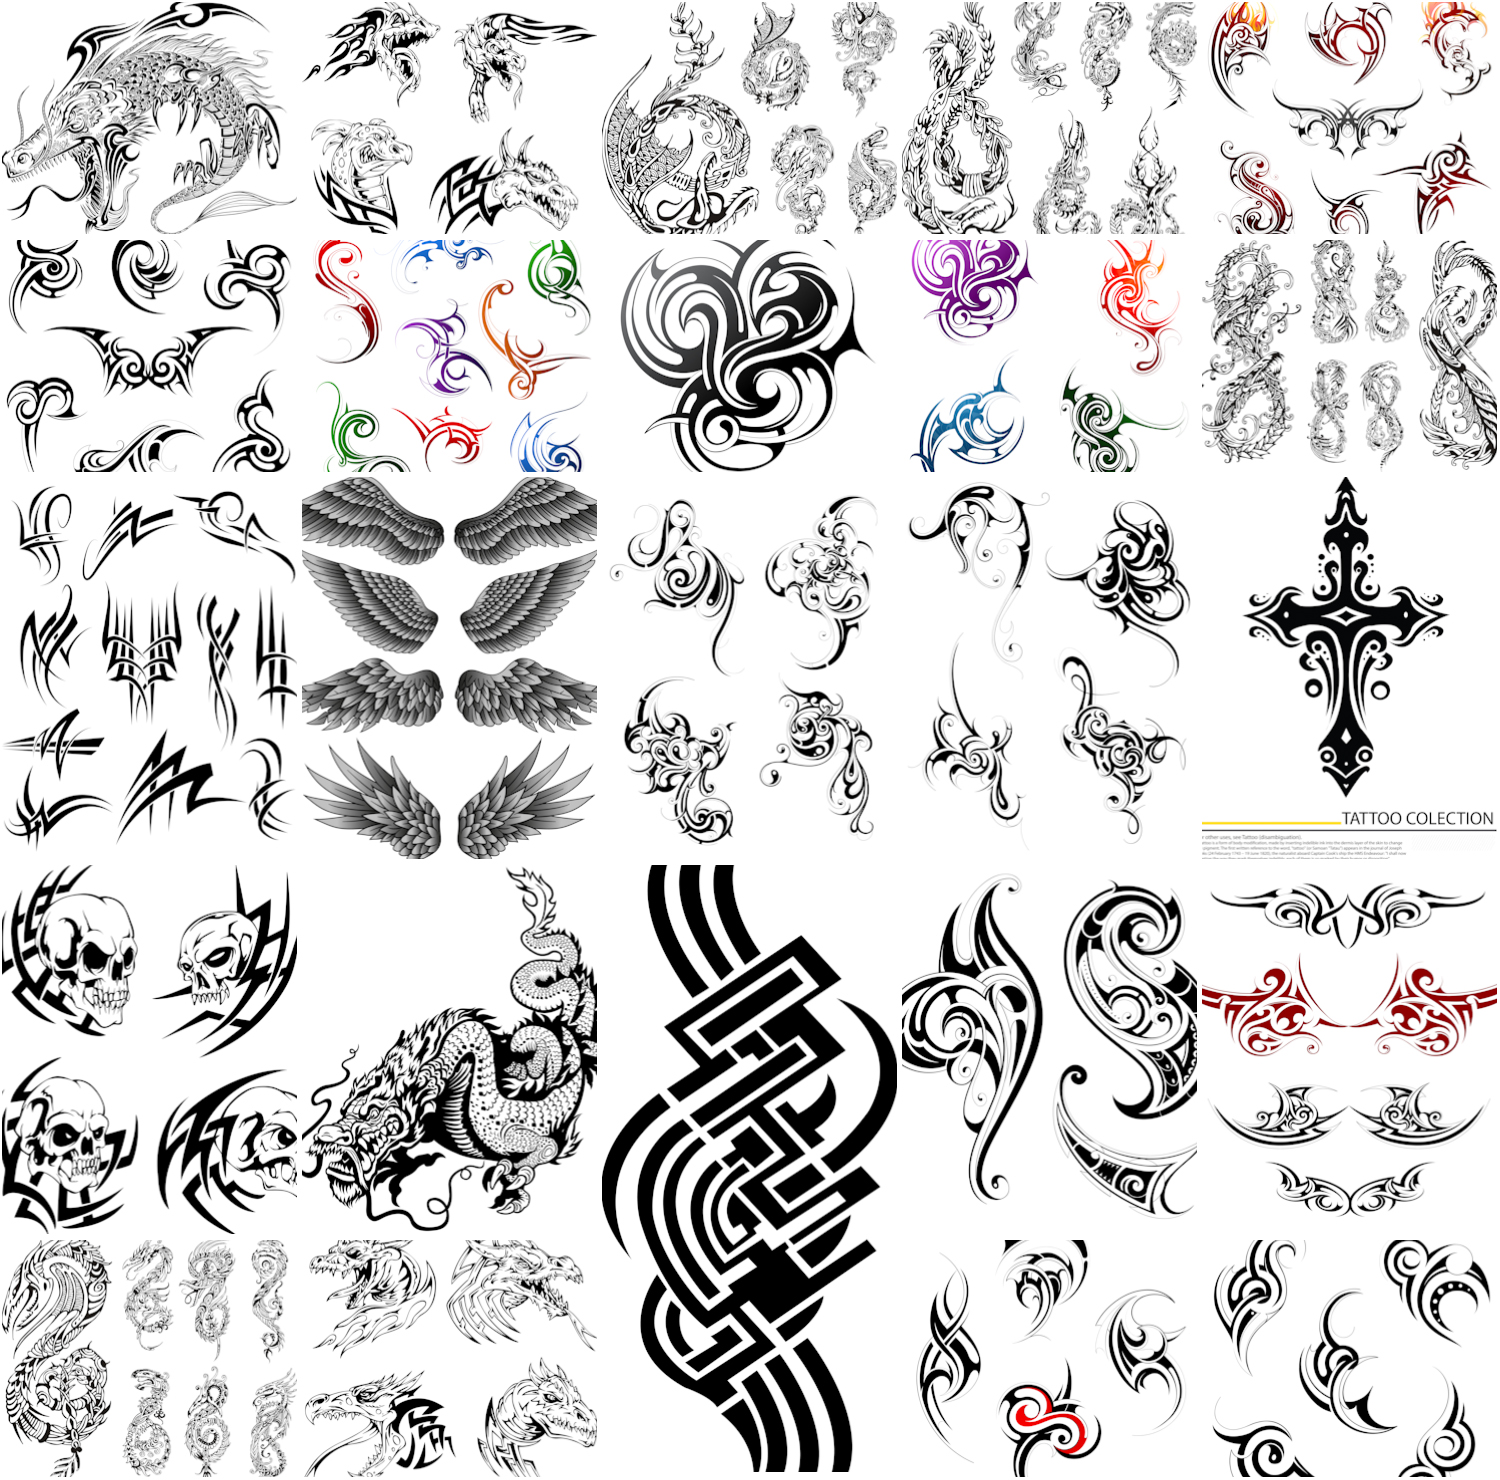 tattoo collection by wardy360 on DeviantArt